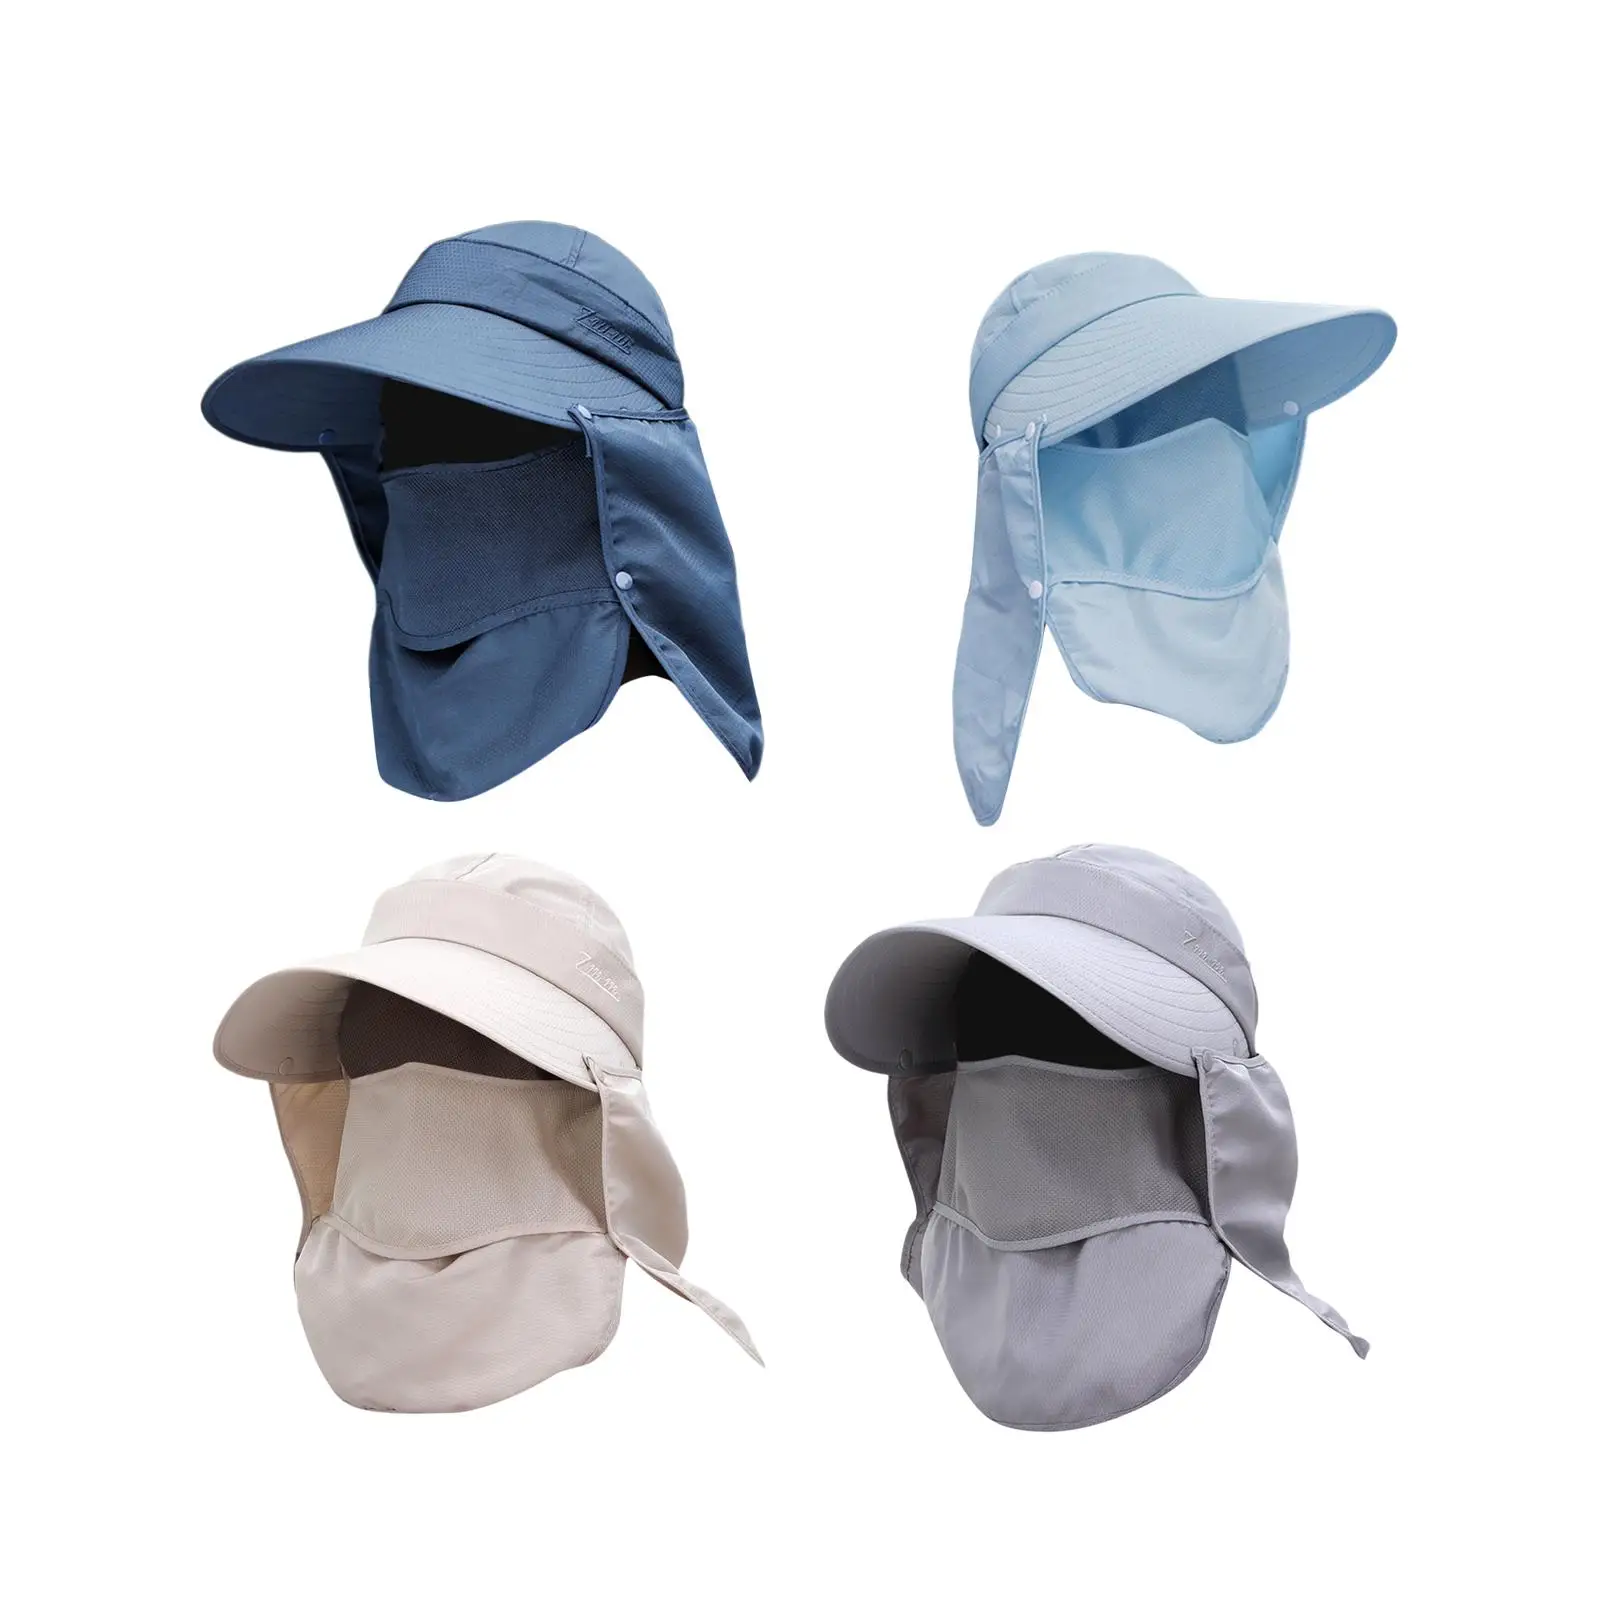 Sun Protection Face Covering with Removable Neck Flap Cover for Unisex Beach